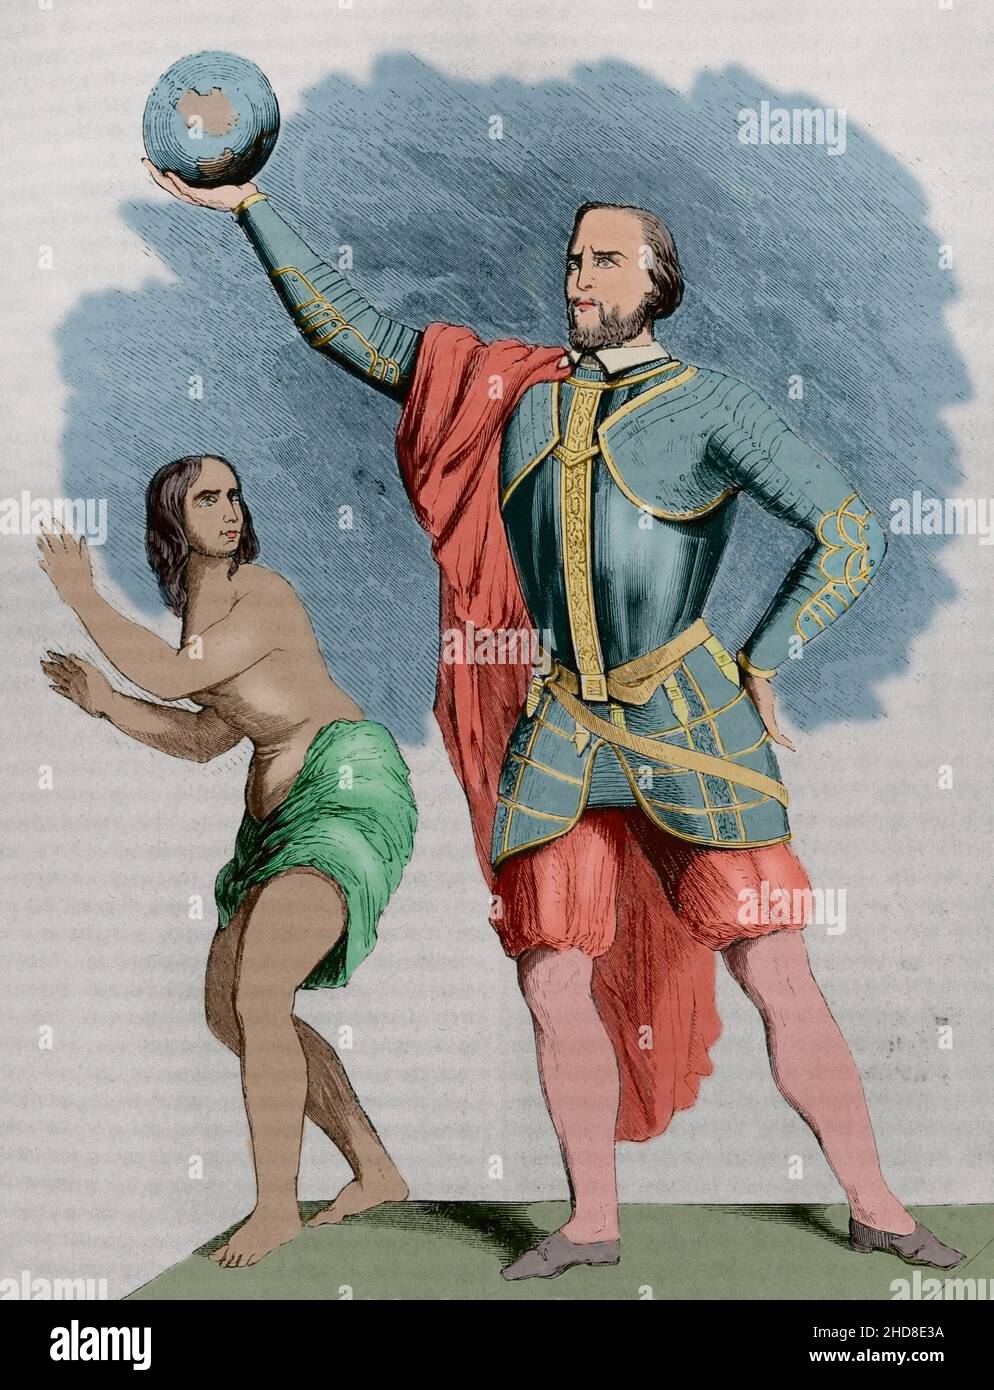 Christopher Columbus (1451-1506). Navigator, cartographer and admiral. He served the Crown of Castile. Discoverer of America in 1492. Allegorical engraving. Later colouration. Las Glorias Nacionales, 1853. Stock Photo